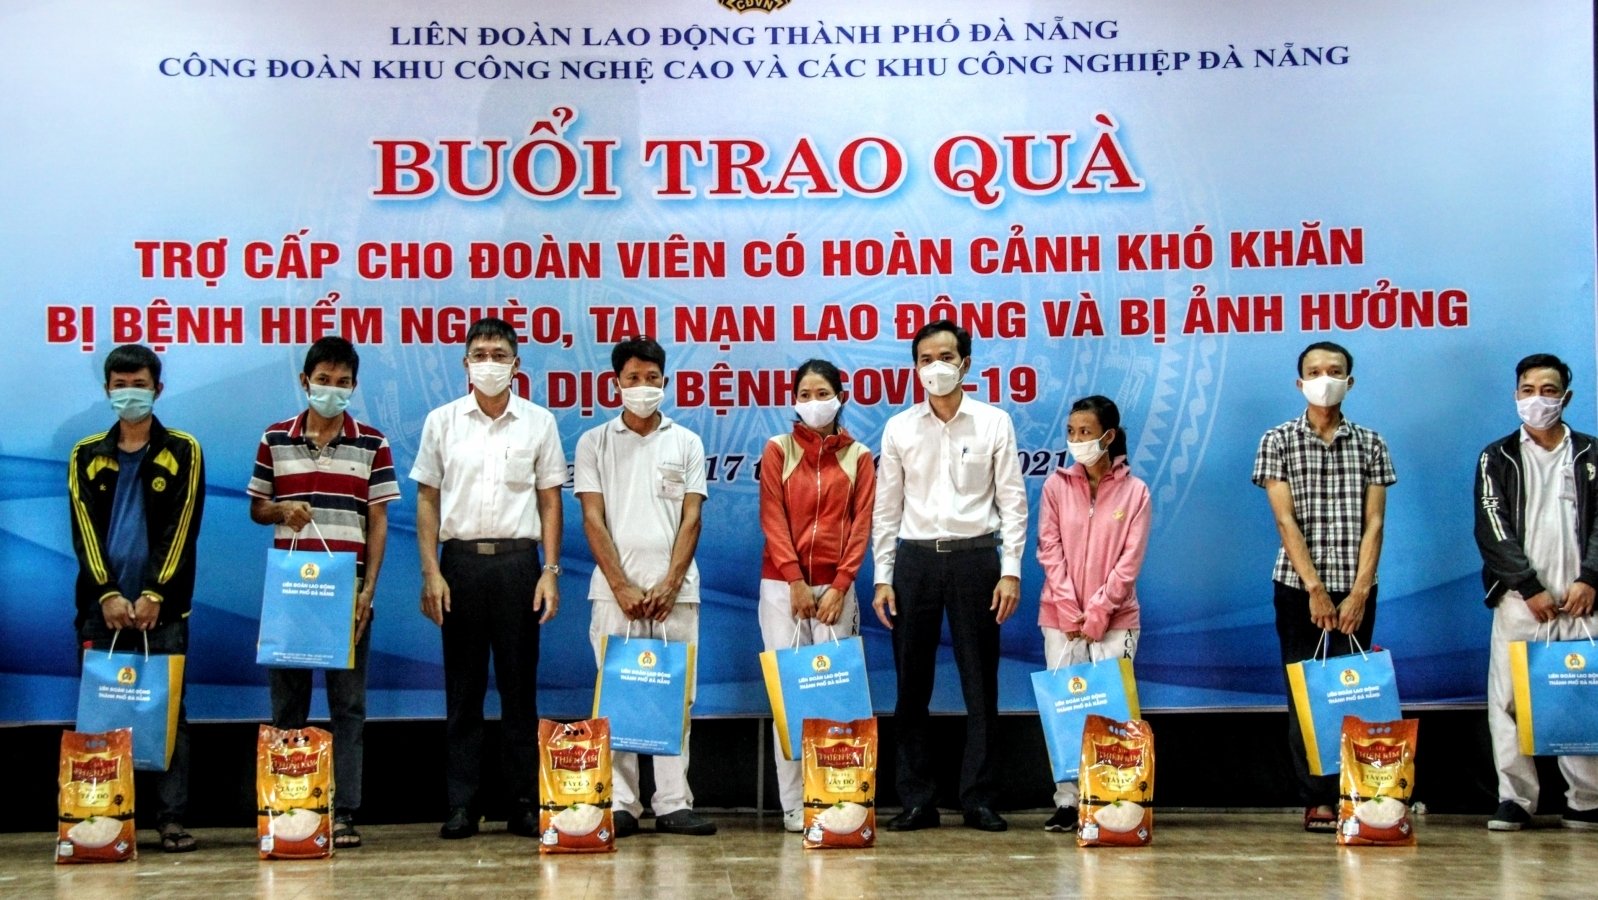 Workers affected by COVID-19 receive support from a trade union organisation in Da Nang.